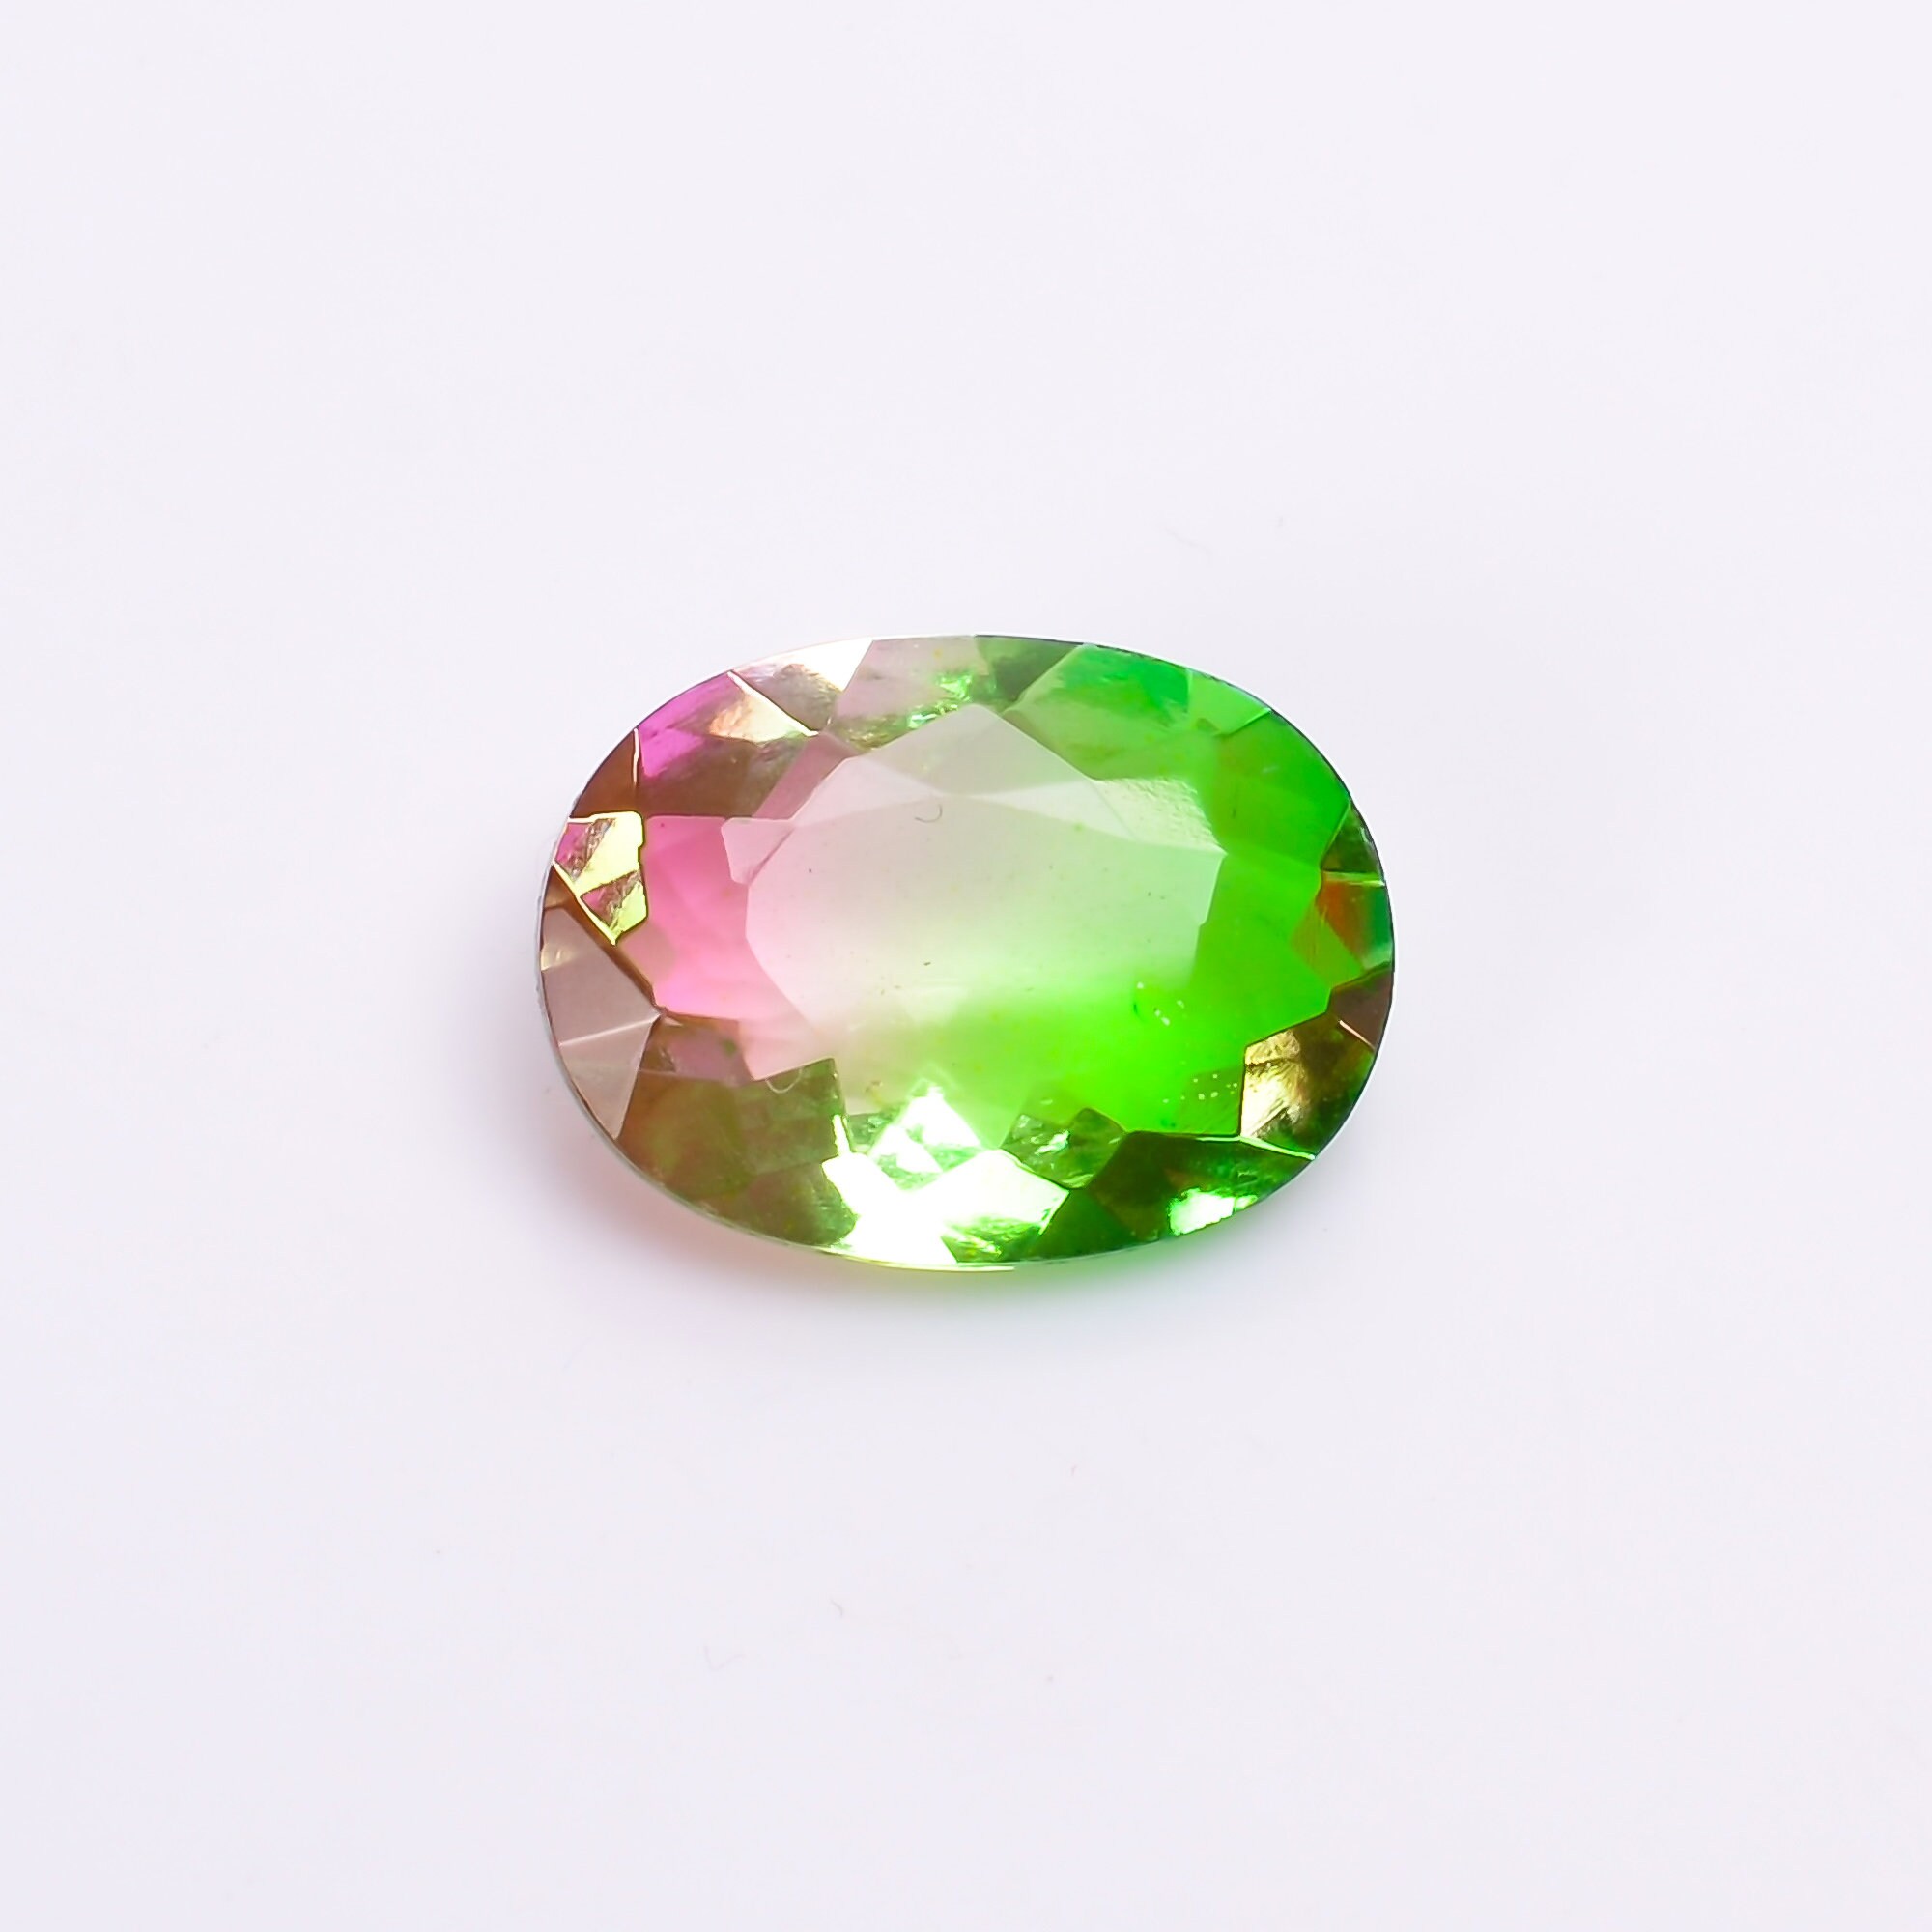 Classic Bio Color Tourmline Crystal Doublet Oval Shape Cut Stone Loose Gemstone For Making Jewelry 35X20X11 mm R-6216 45 Ct